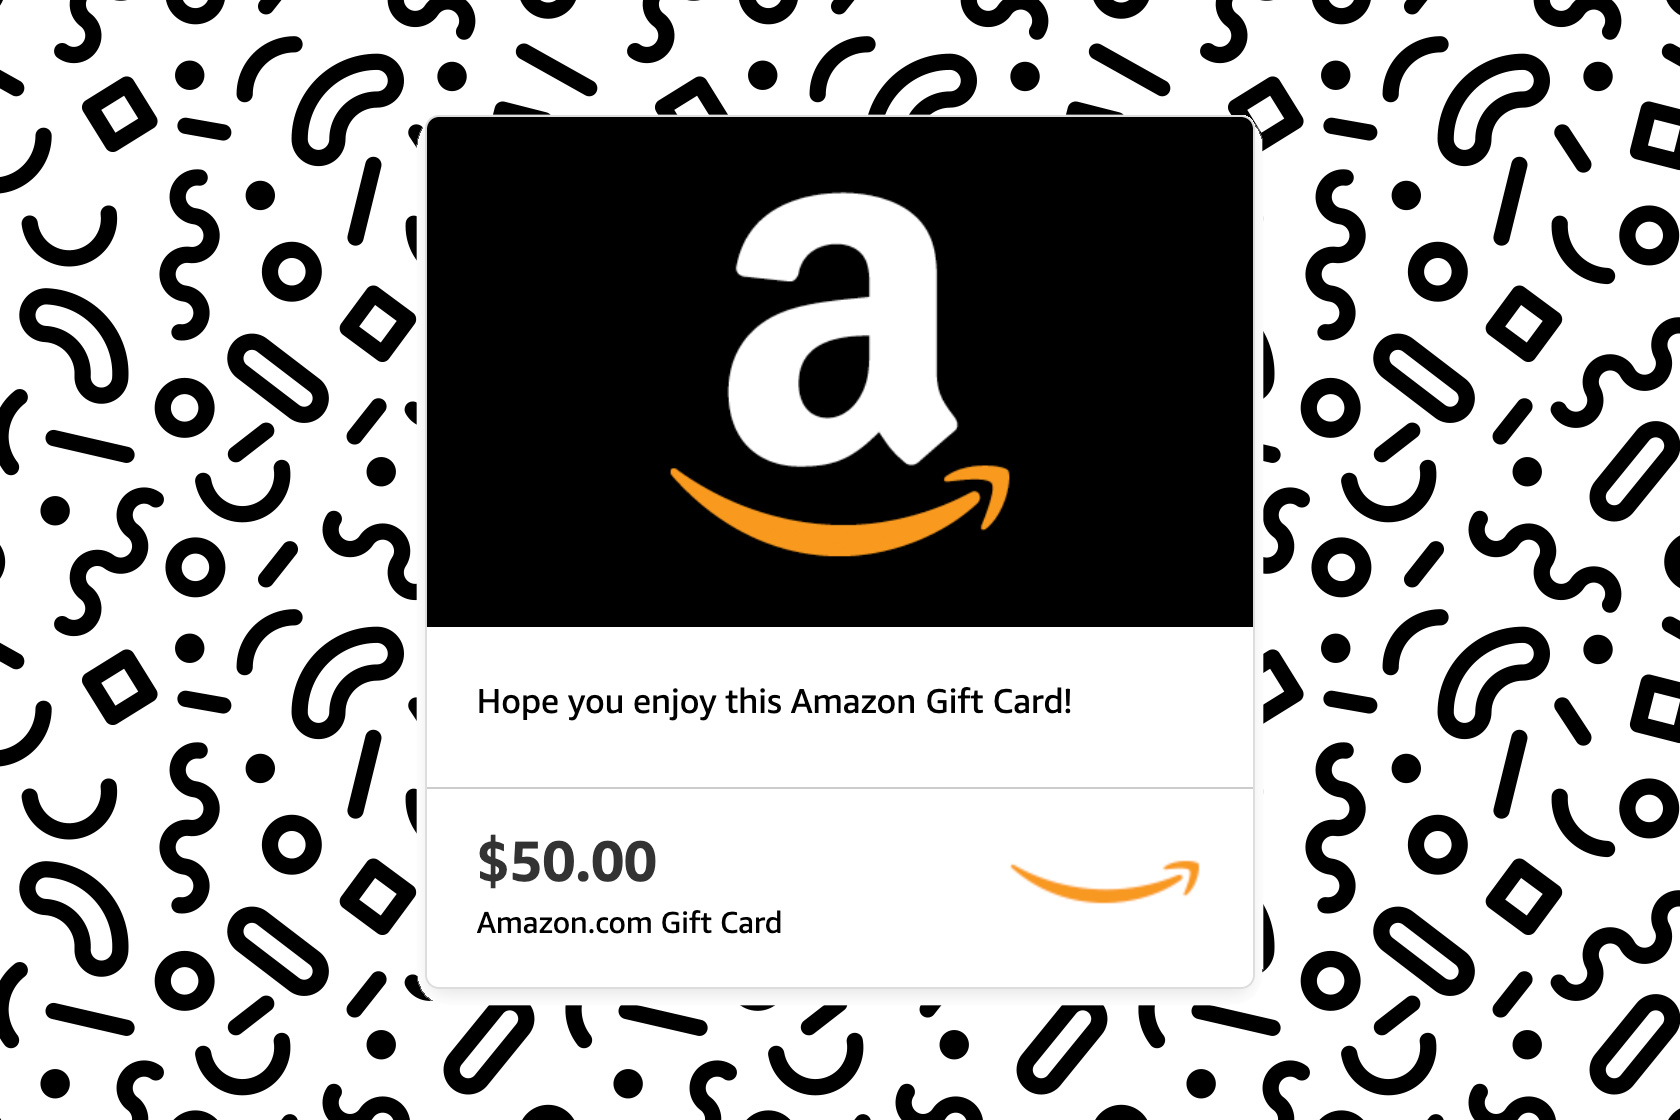 Amazon S Handing Out 10 When You Buy A 40 Gift Card